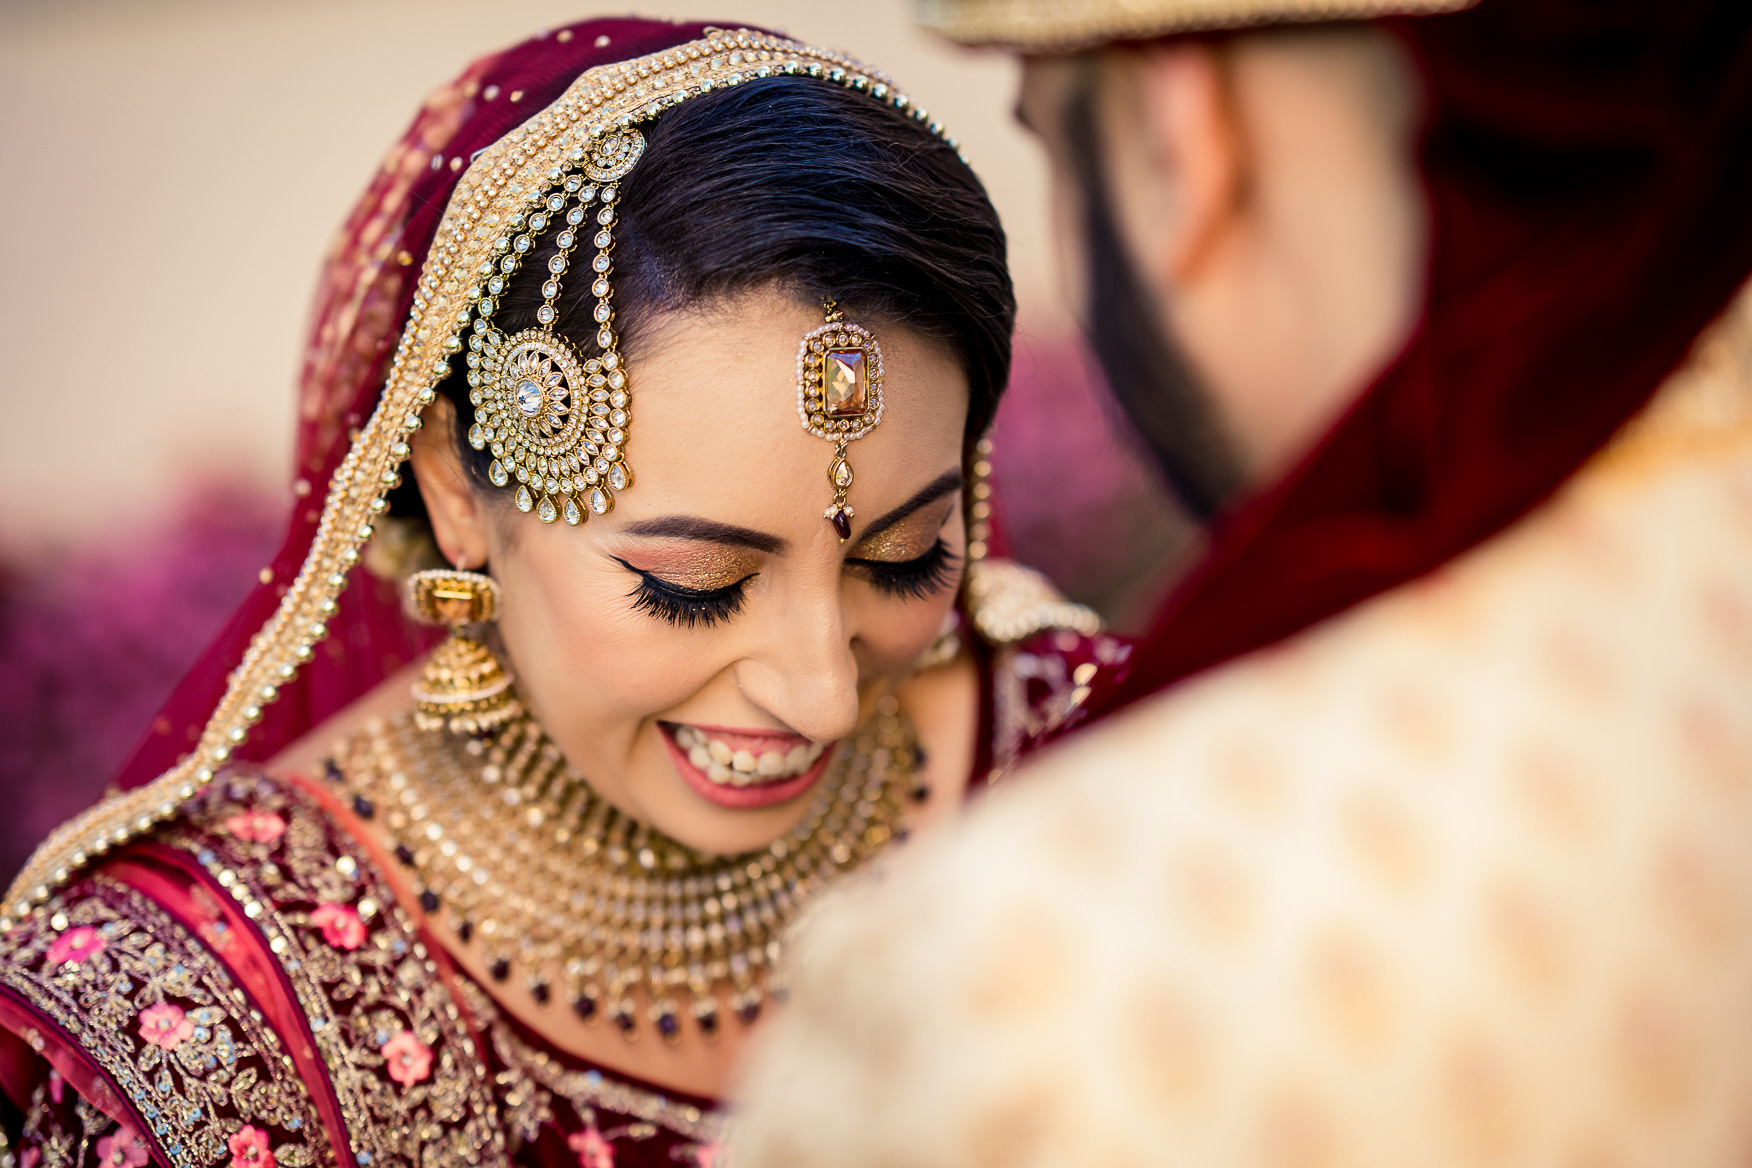 wedding photo pose inspiration Archives | Indian Wedding Photographers |  Häring Photography and Films, Indian Wedding Videographer in Florida, Best  Muslim, Hindu - South East Asian Wedding Photographers